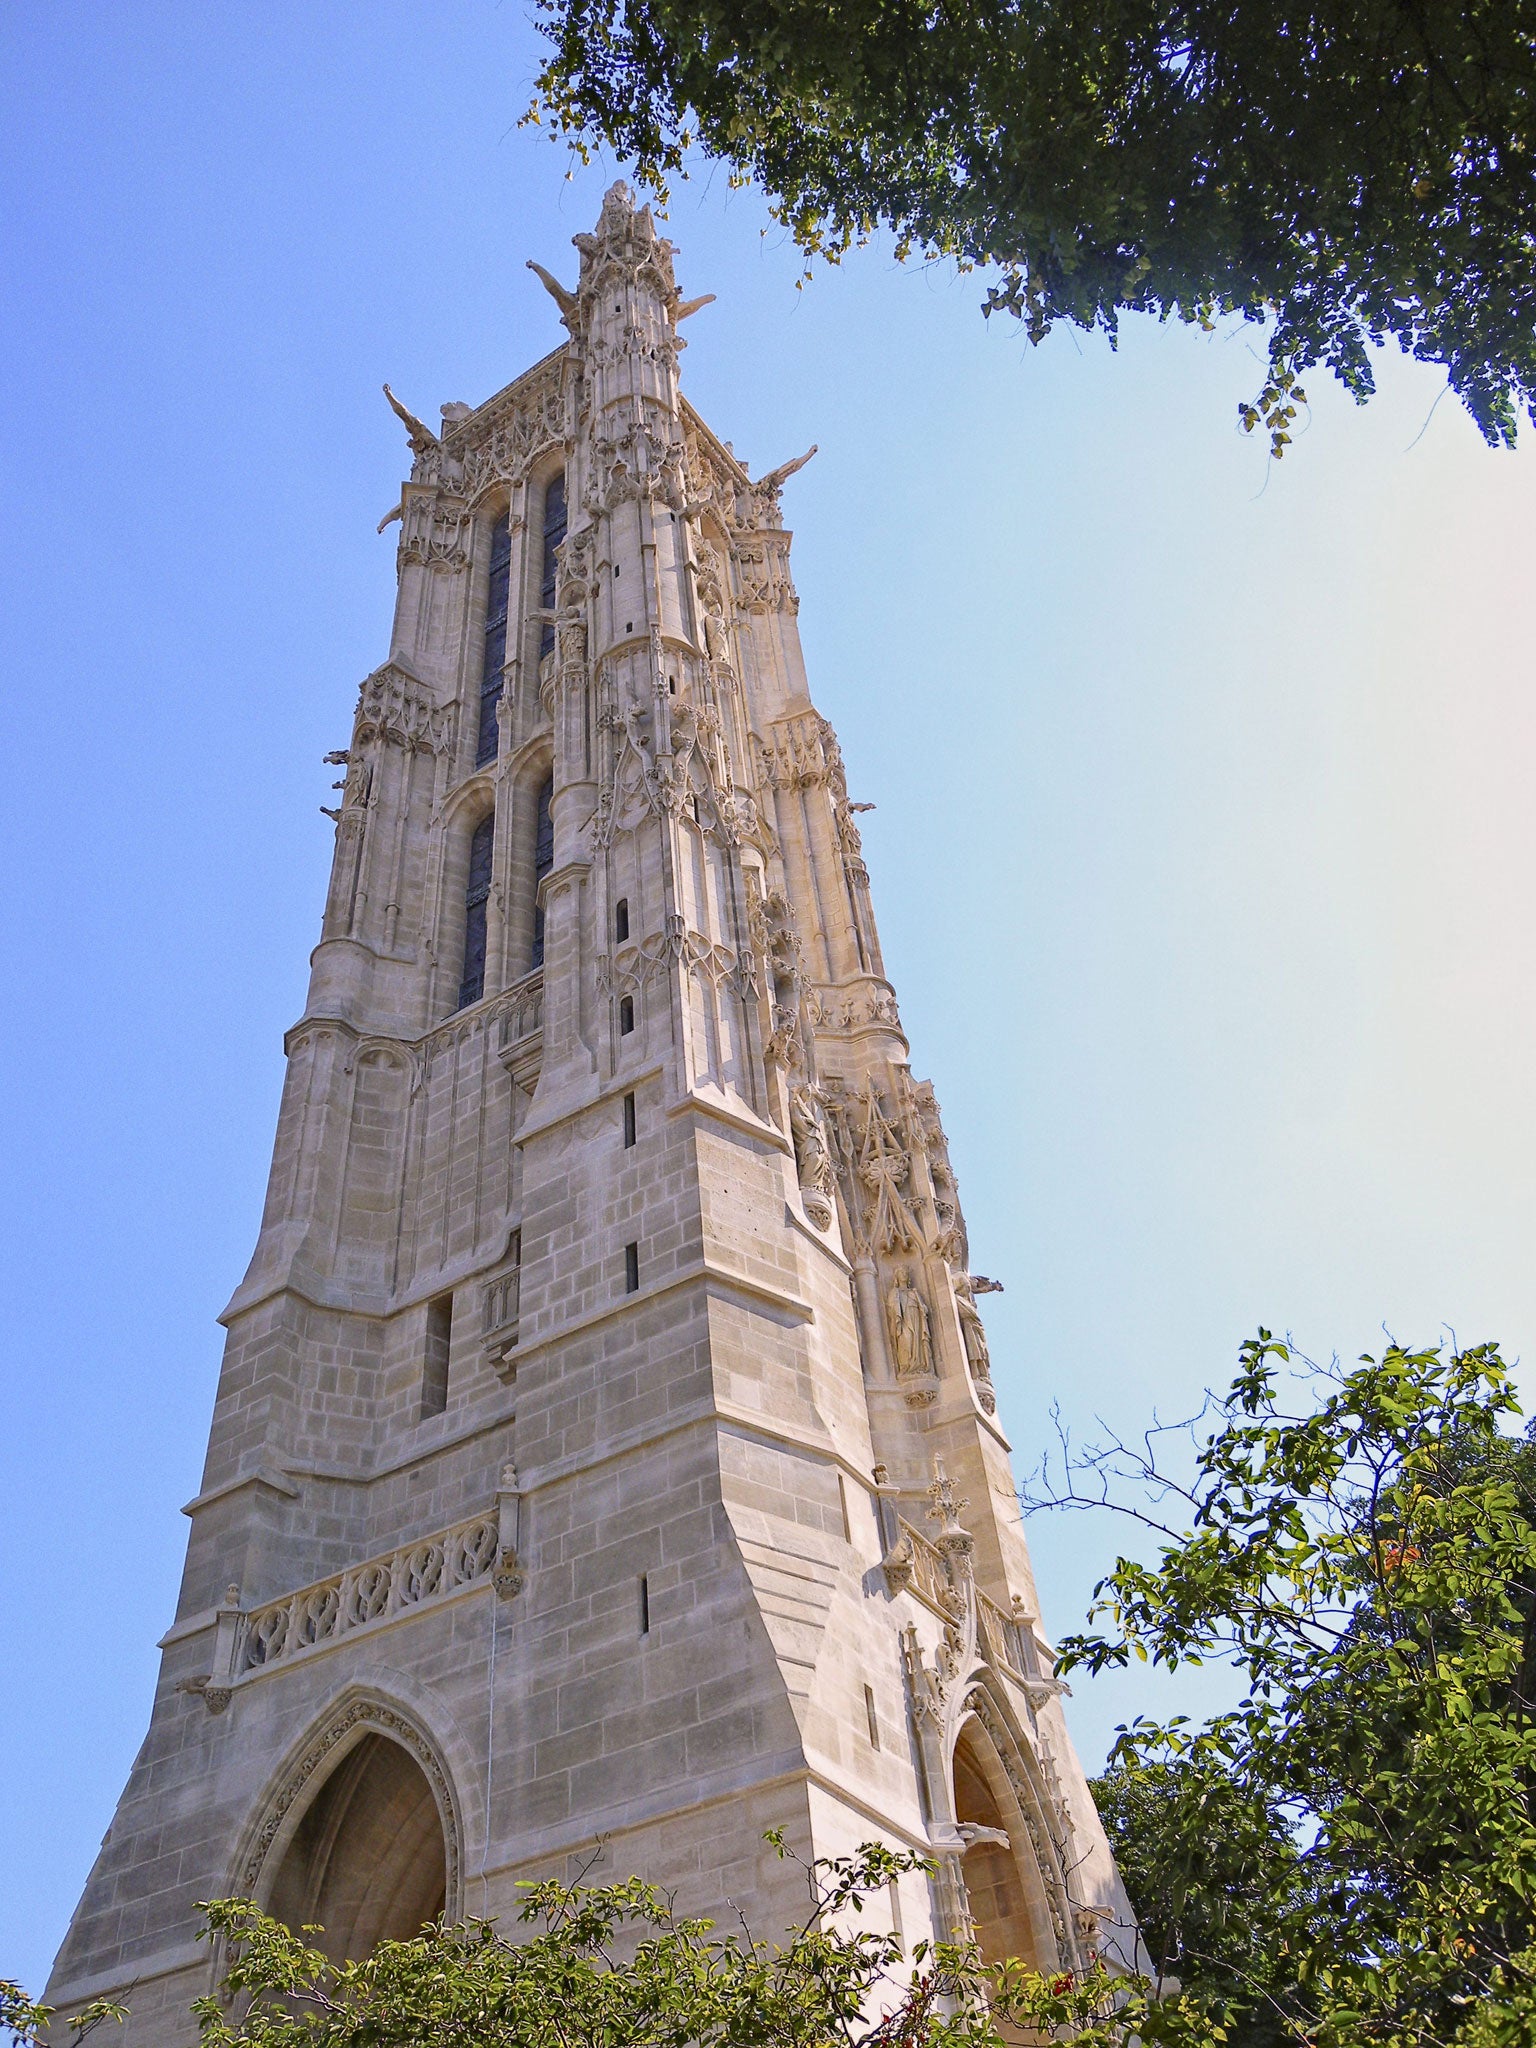 For the first time since it was built in the early 1500s, the Tour Saint Jacques is opening to the public this summer